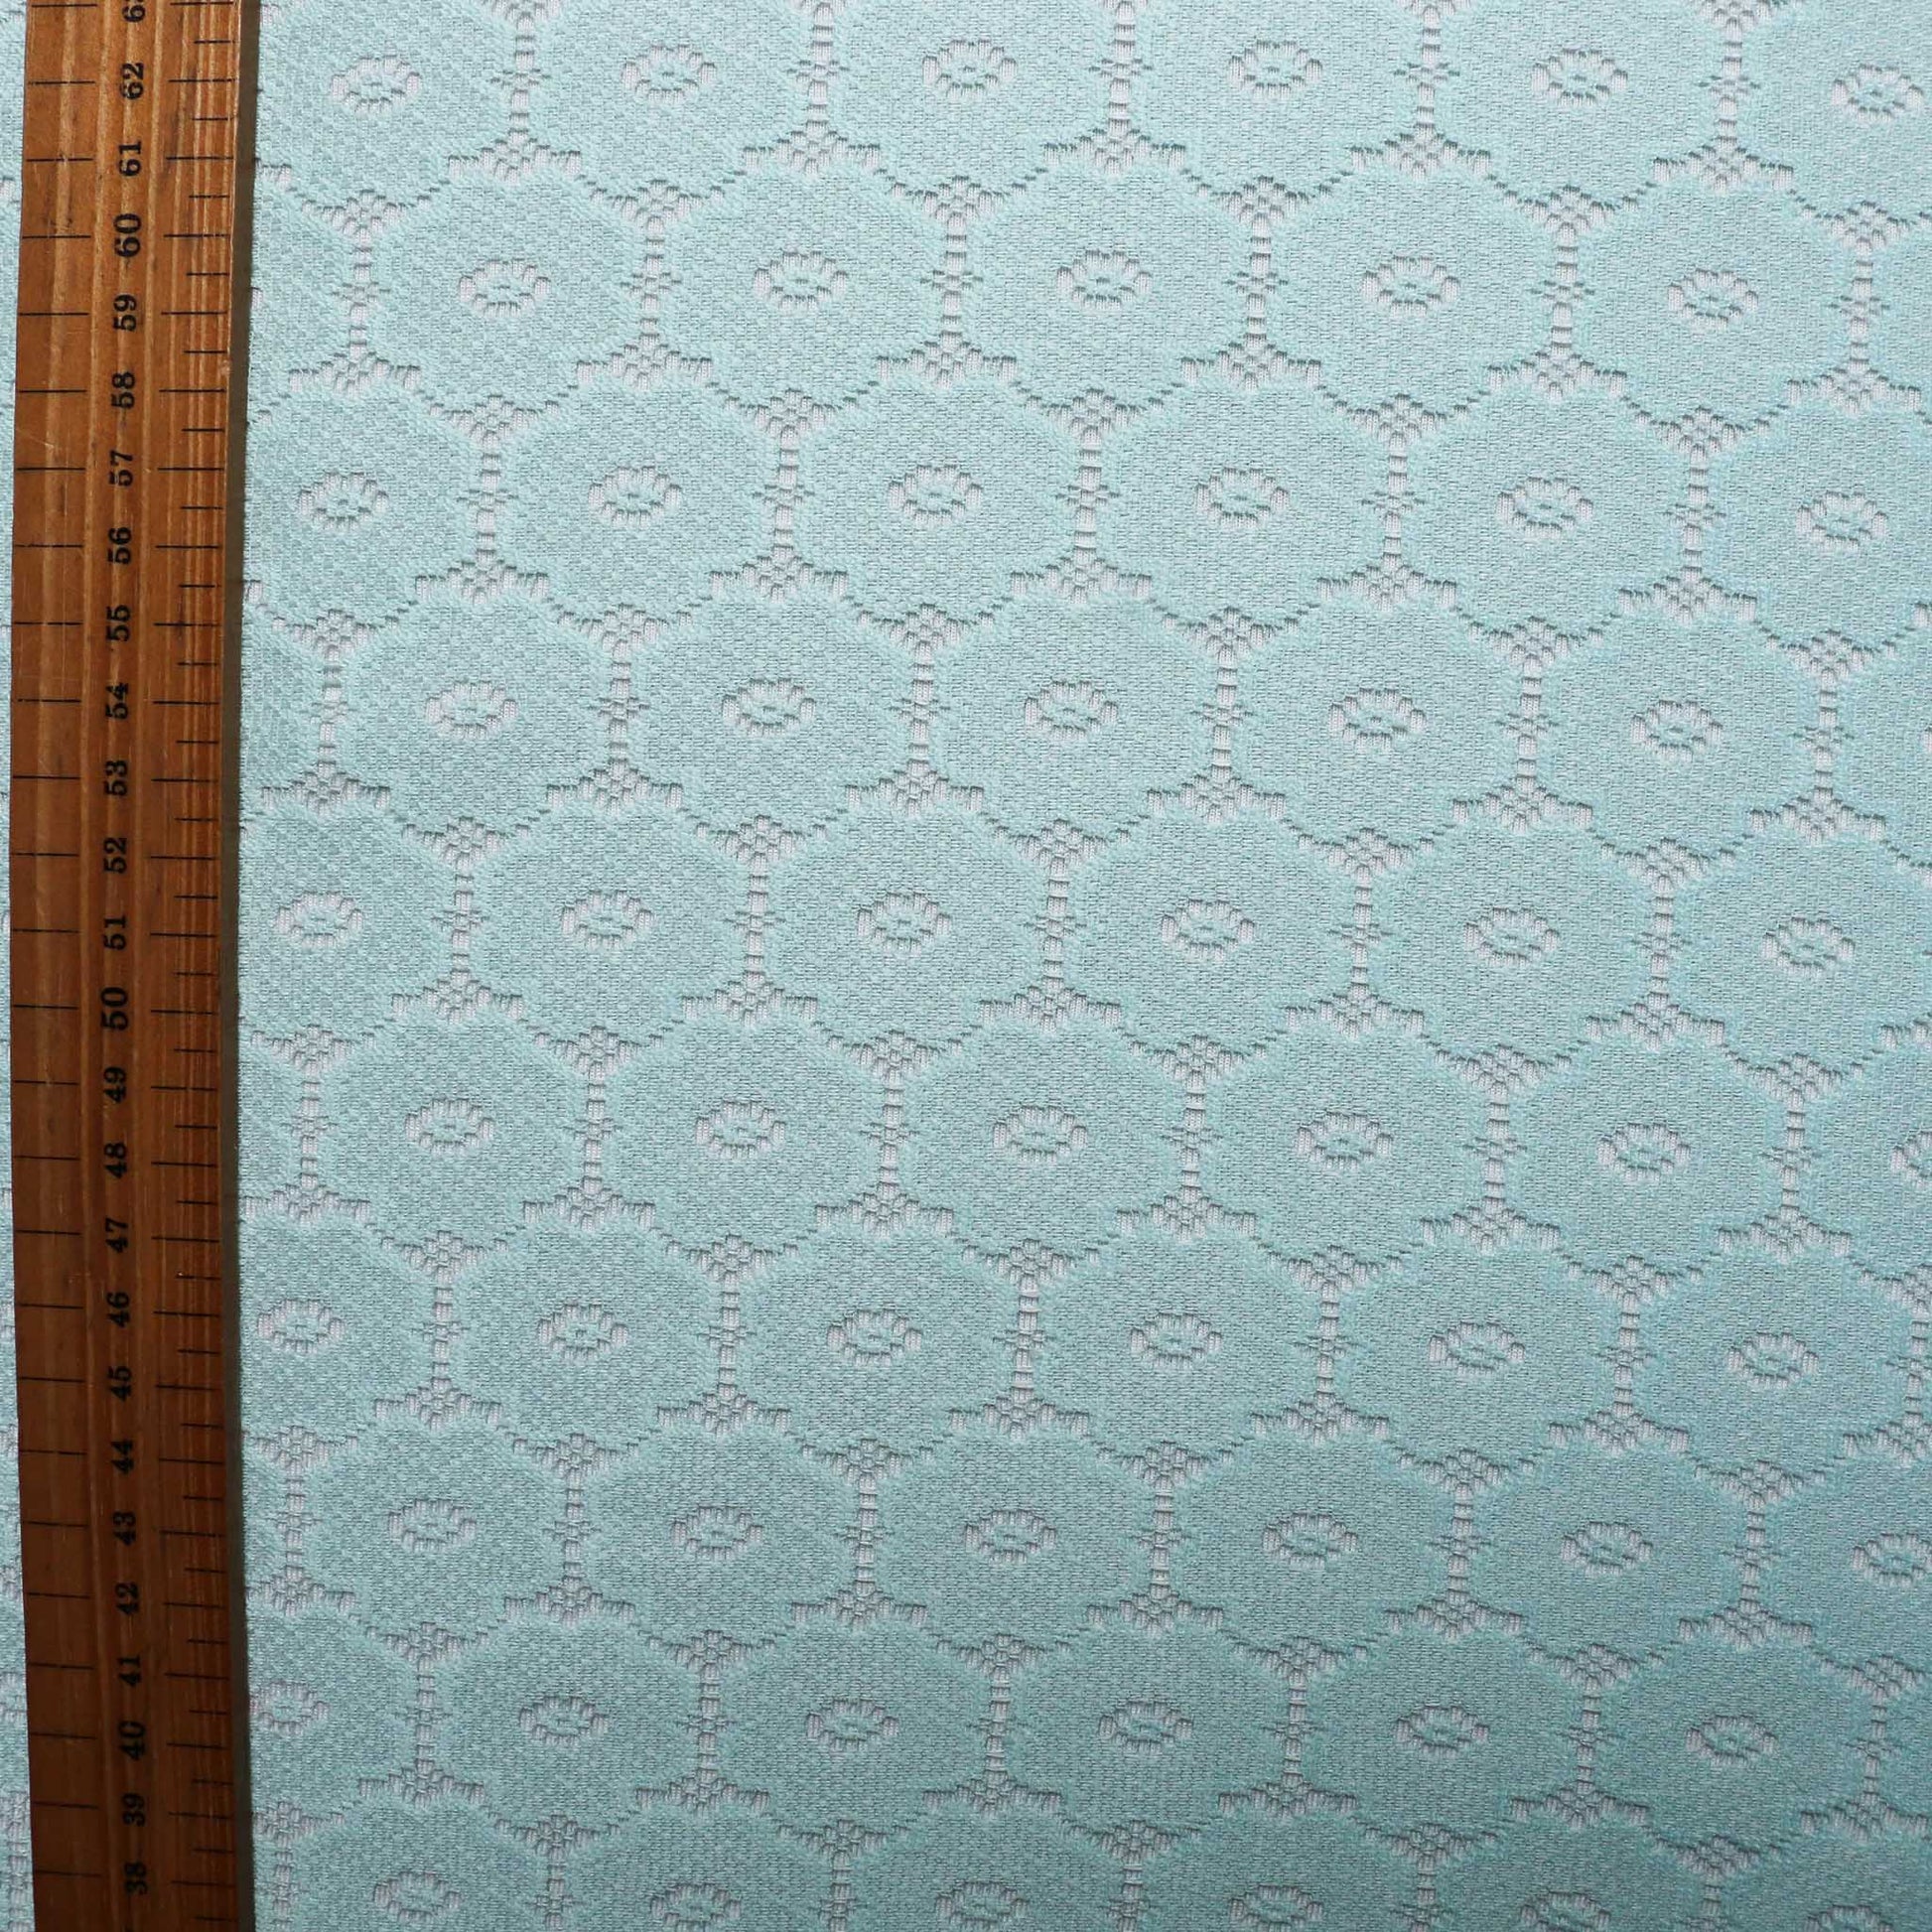 metre delicate lace dressmaking fabric with mint green floral pattern